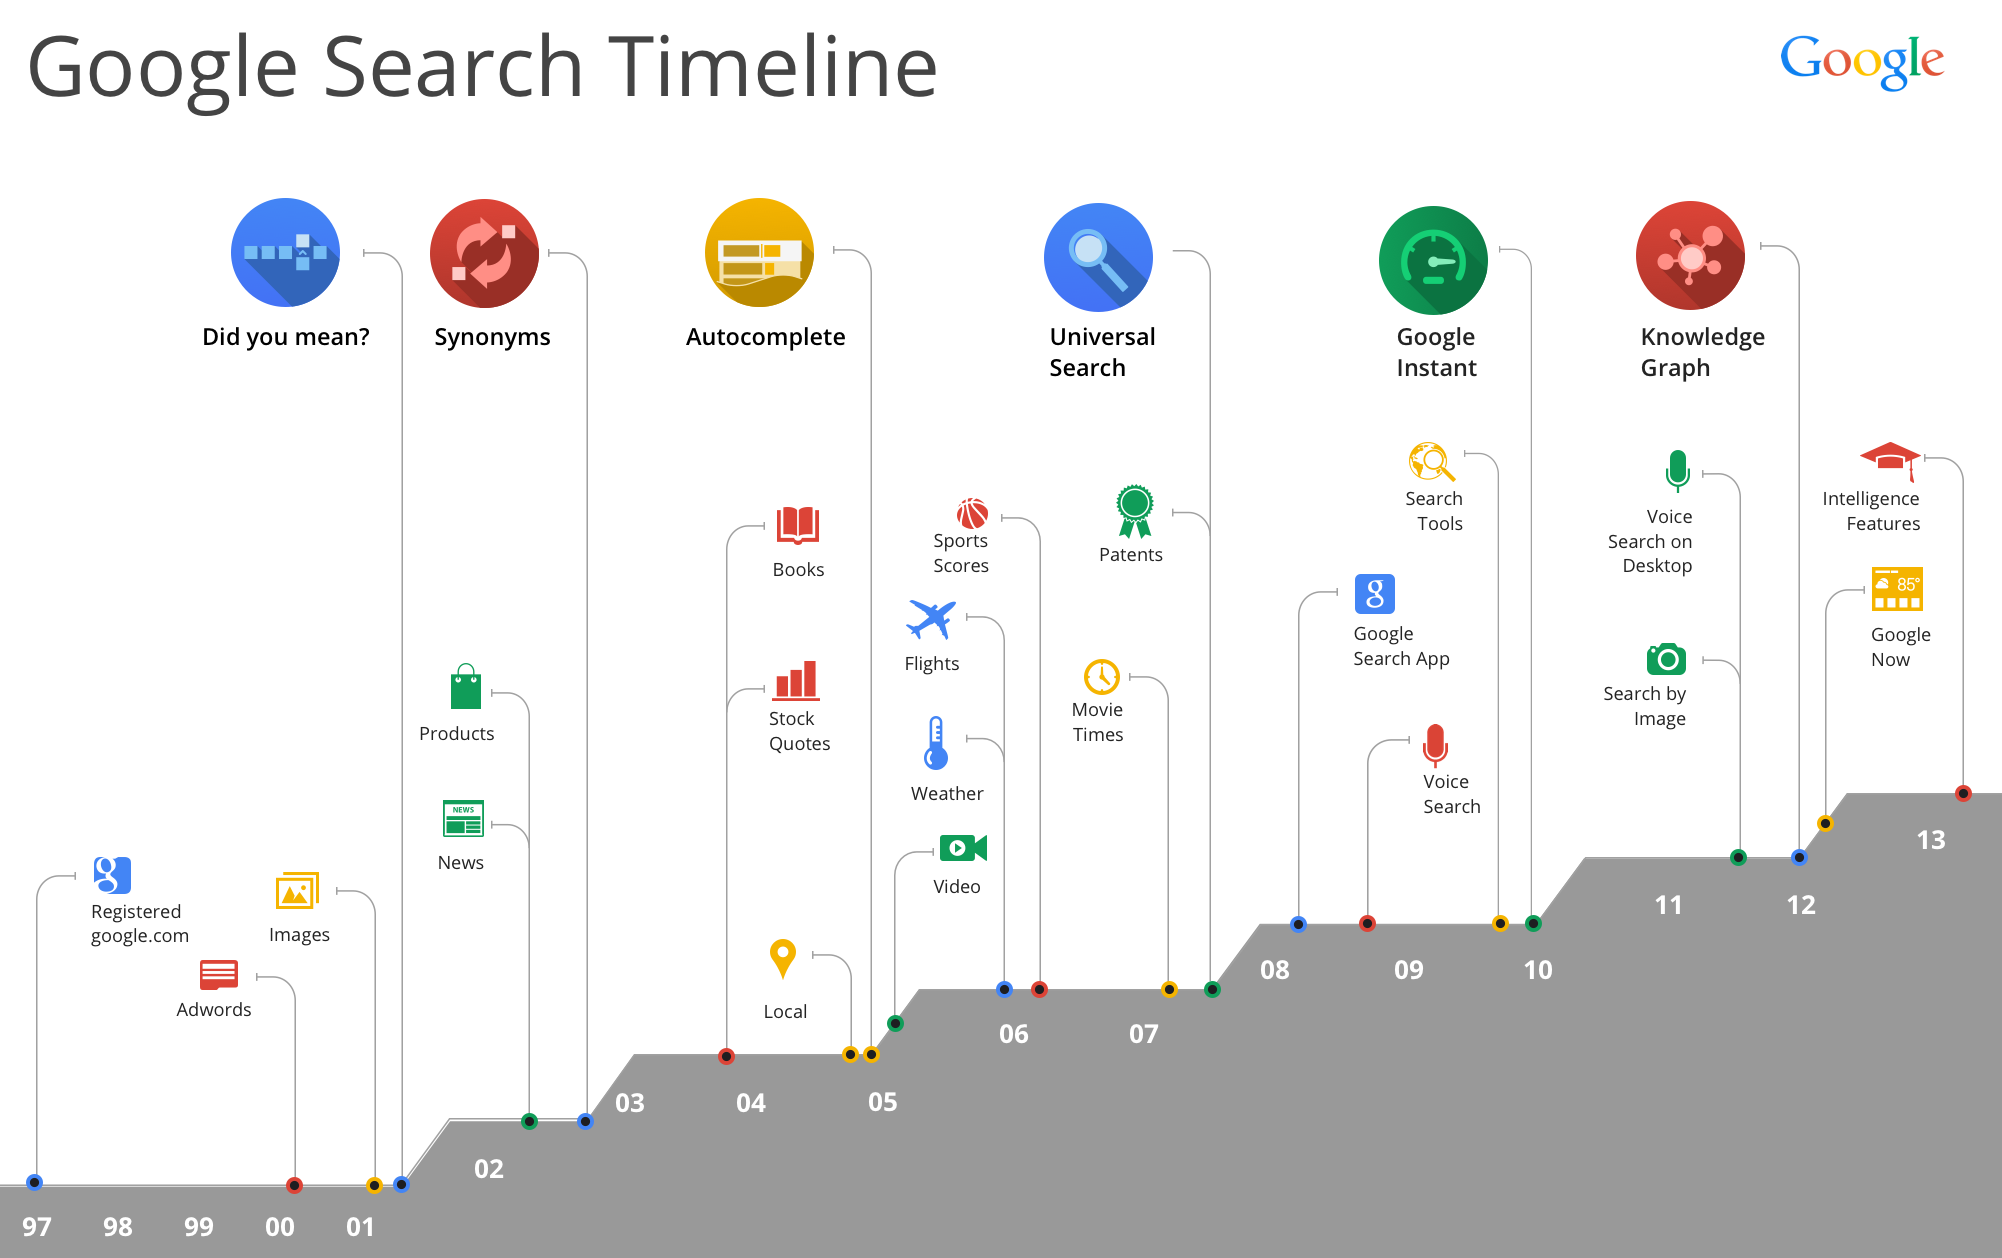 Google-Search-History-Timeline-Infographic